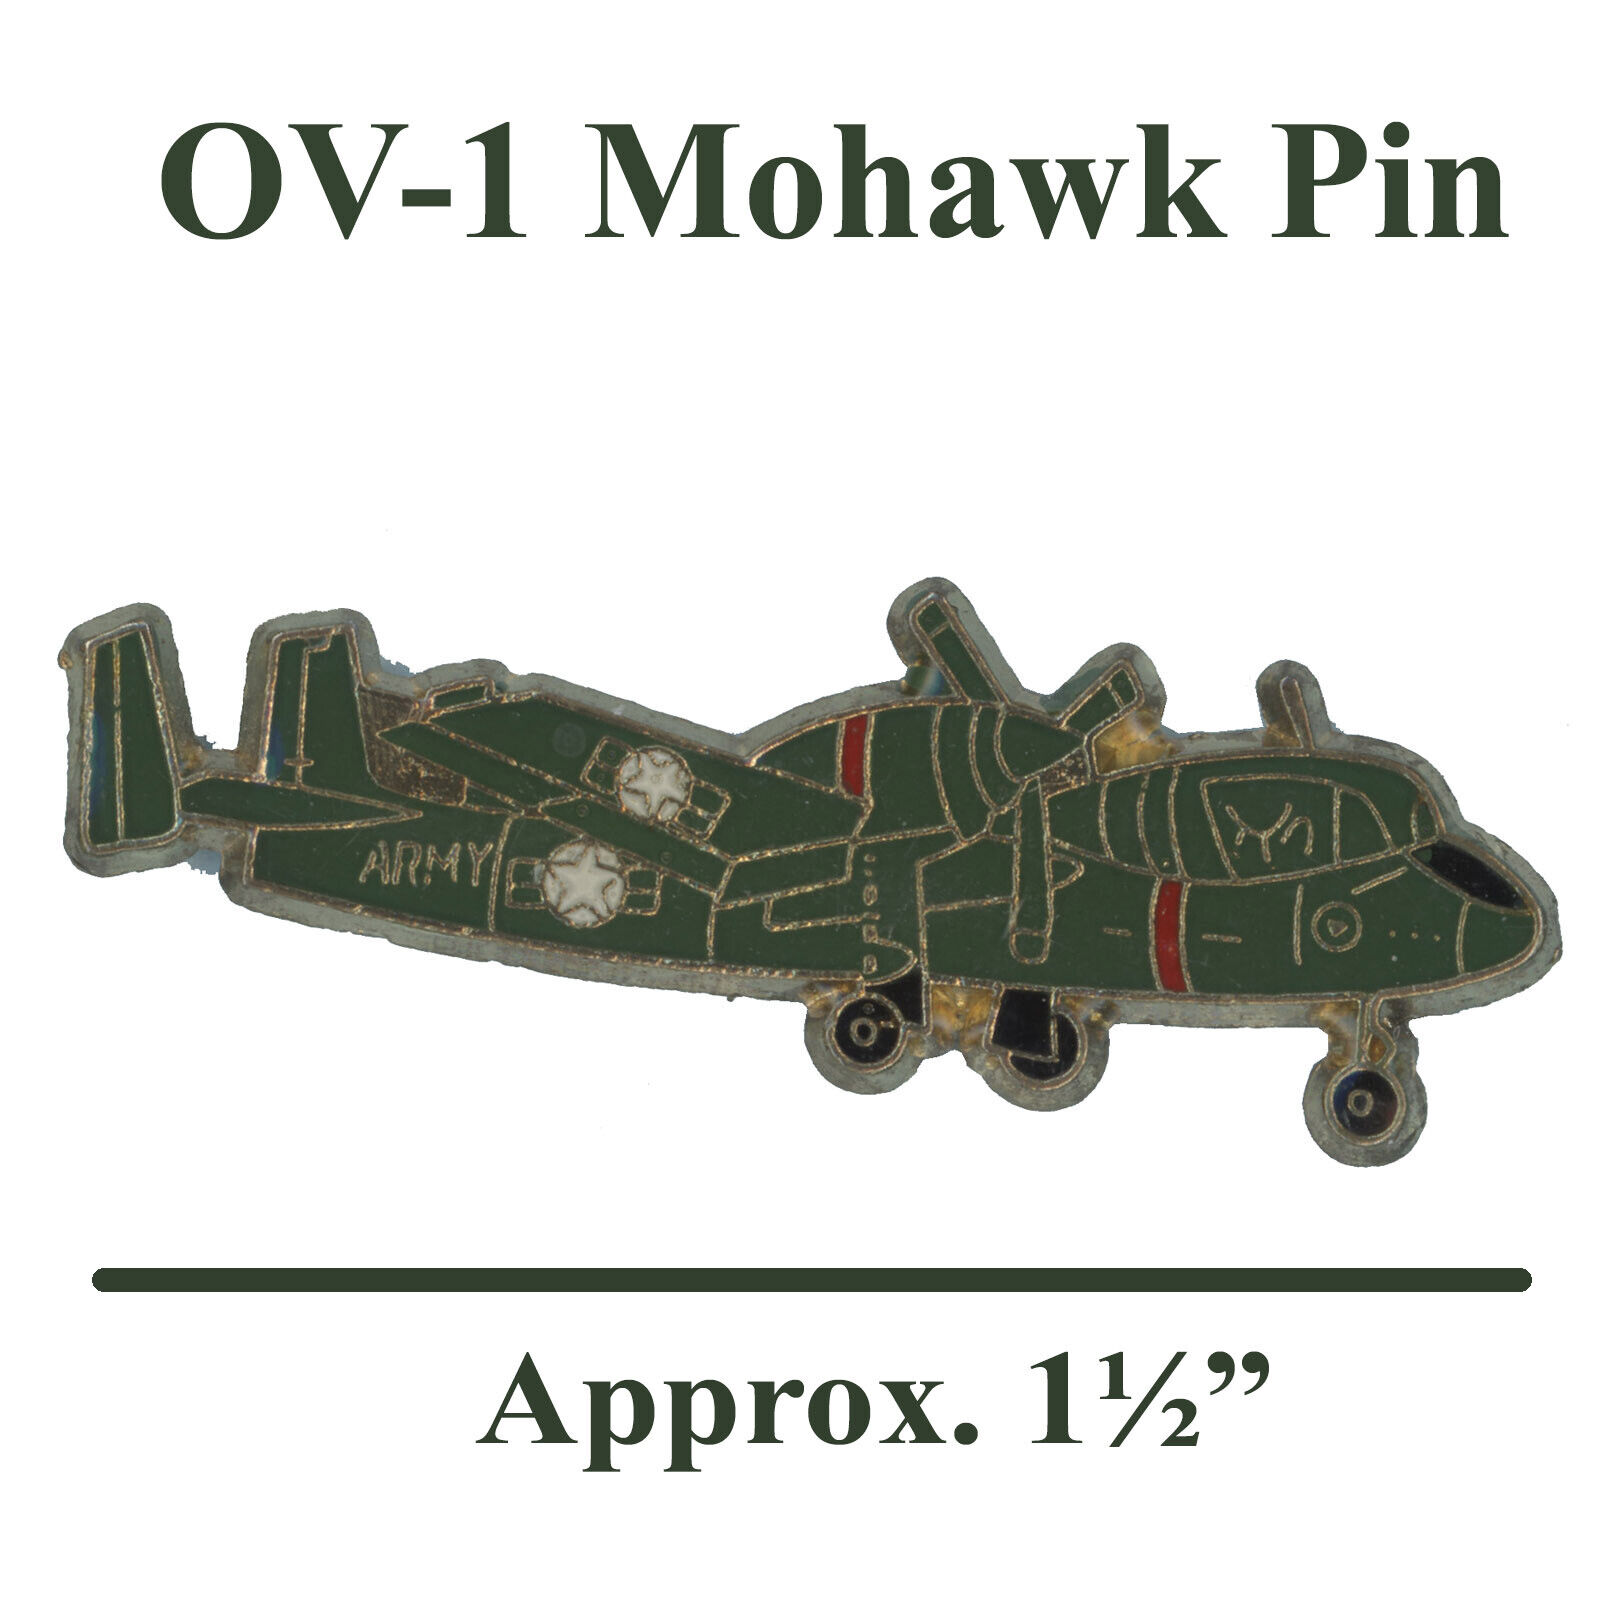 OV-1 MOHAWK (Grumman)  Collectible  1-Pin  US Army and Army National Guard